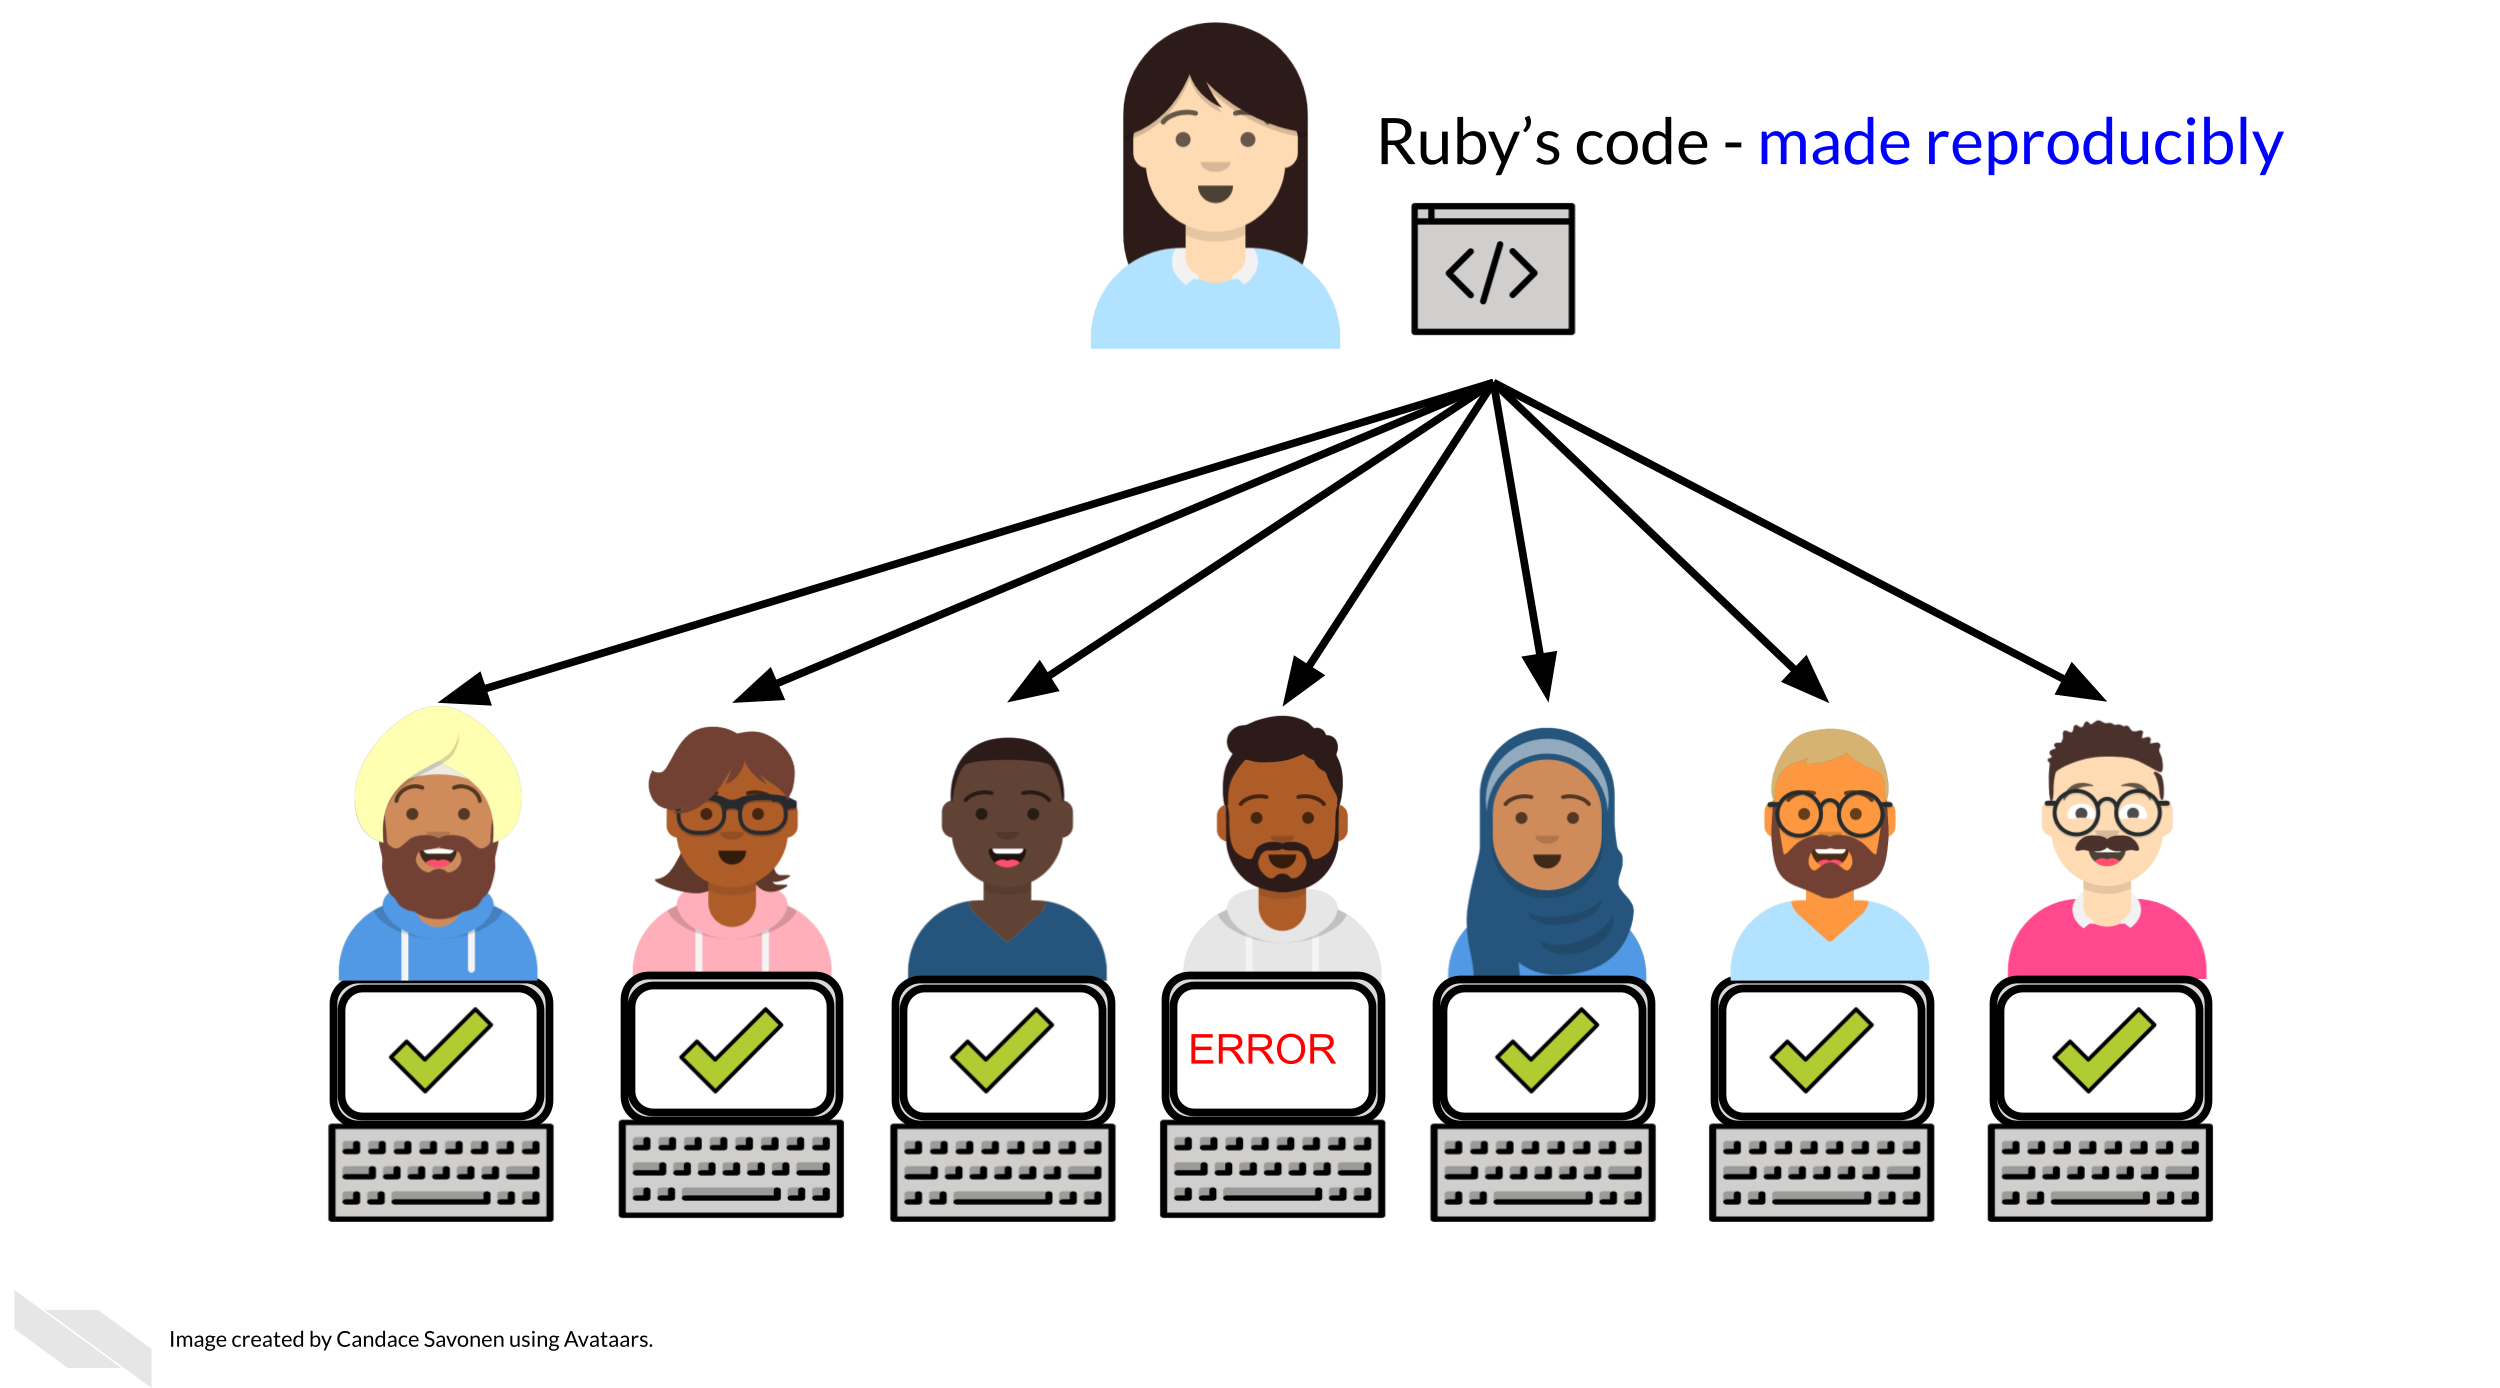 If Ruby’s code is built in a sturdier manner, it will save others’ time who might also need to perform a similar analysis. Ruby’s code is made reproducibly in this example and only one of her seven colleagues that are using her code needed to troubleshoot an error.